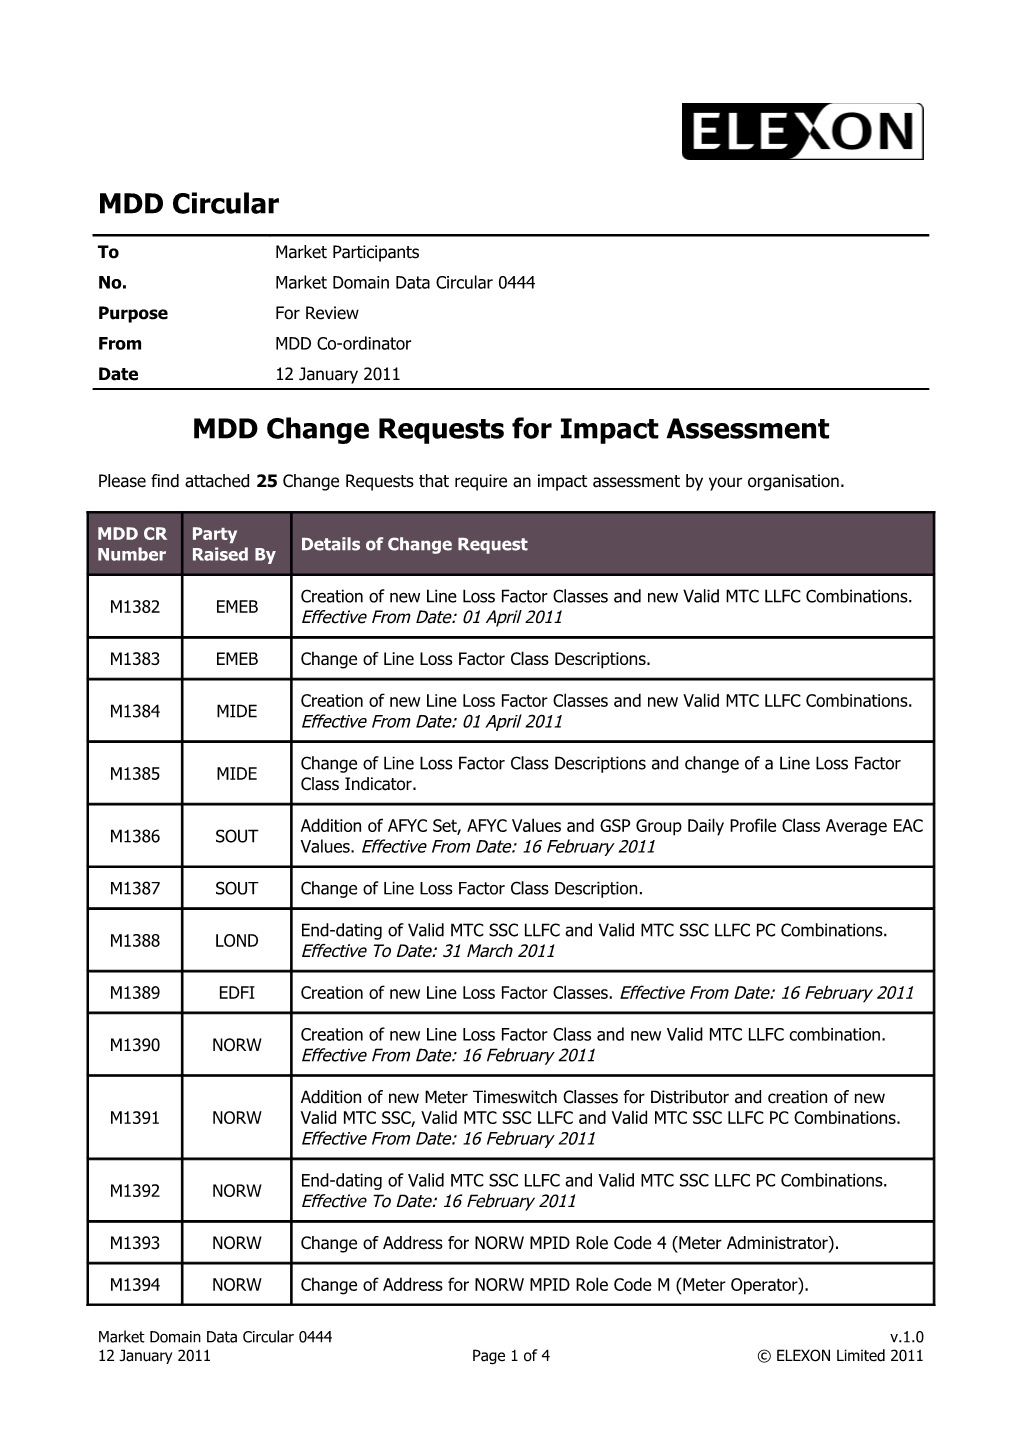 MDD00444: MDD Change Requests for Impact Assessment